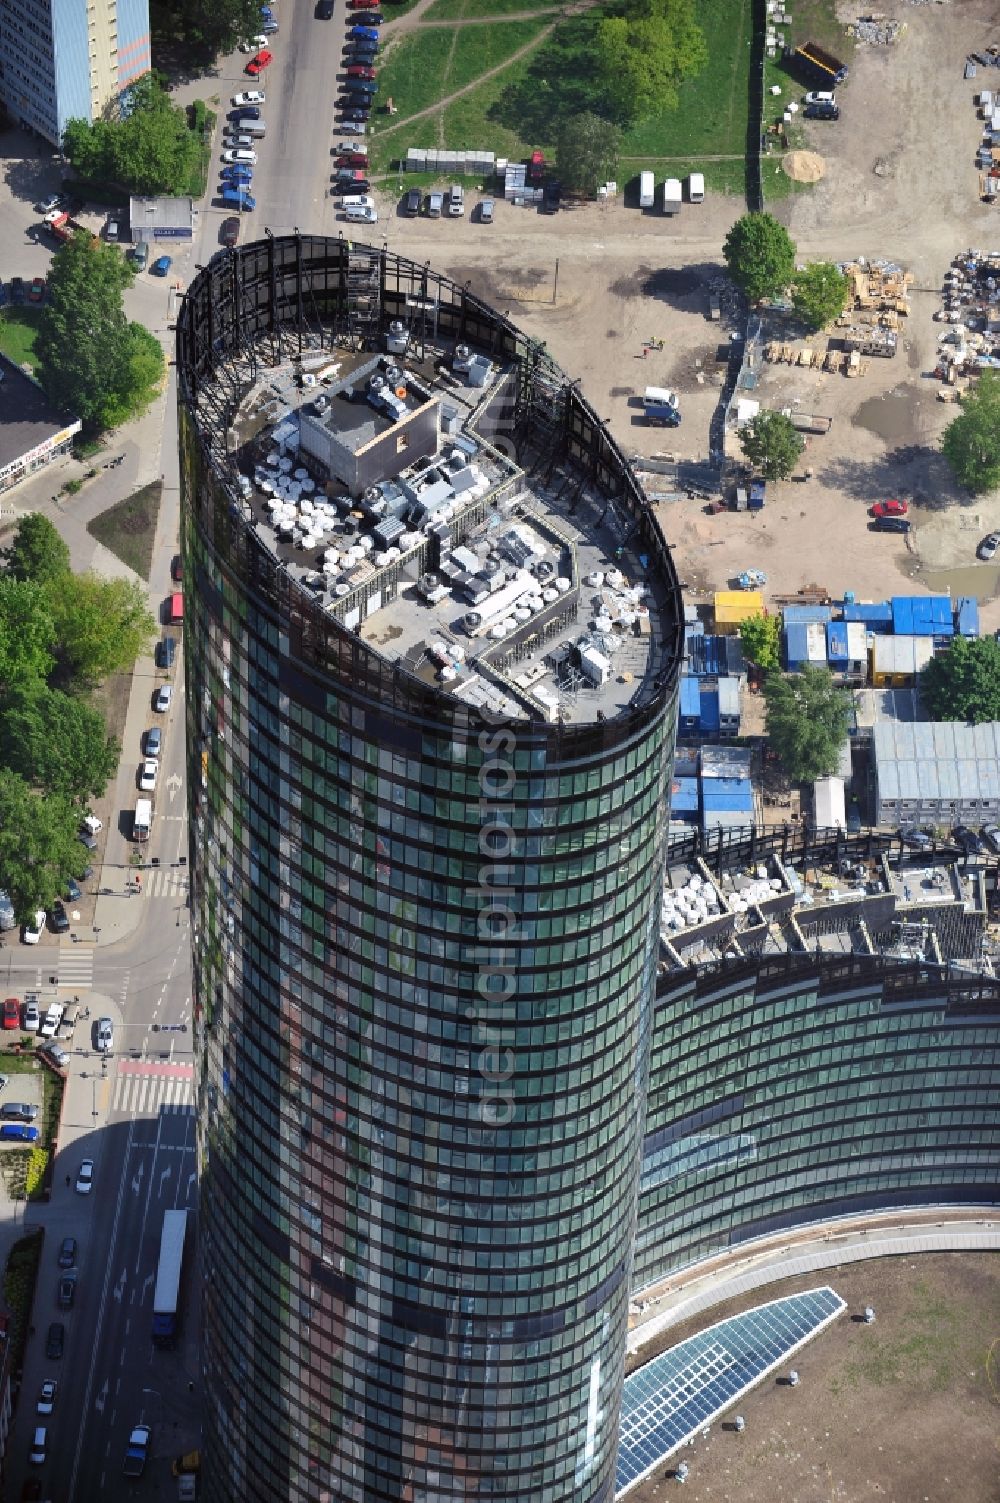 Aerial photograph Wroclaw / Breslau - The newly constructed high-rise sky tower in Wroclaw / Breslau. The modern residential and commercial building is 260 meters, the tallest building in Poland. Architect is Dariusz Dziubi?ski Studio Archiektoniczne FOLD s.c